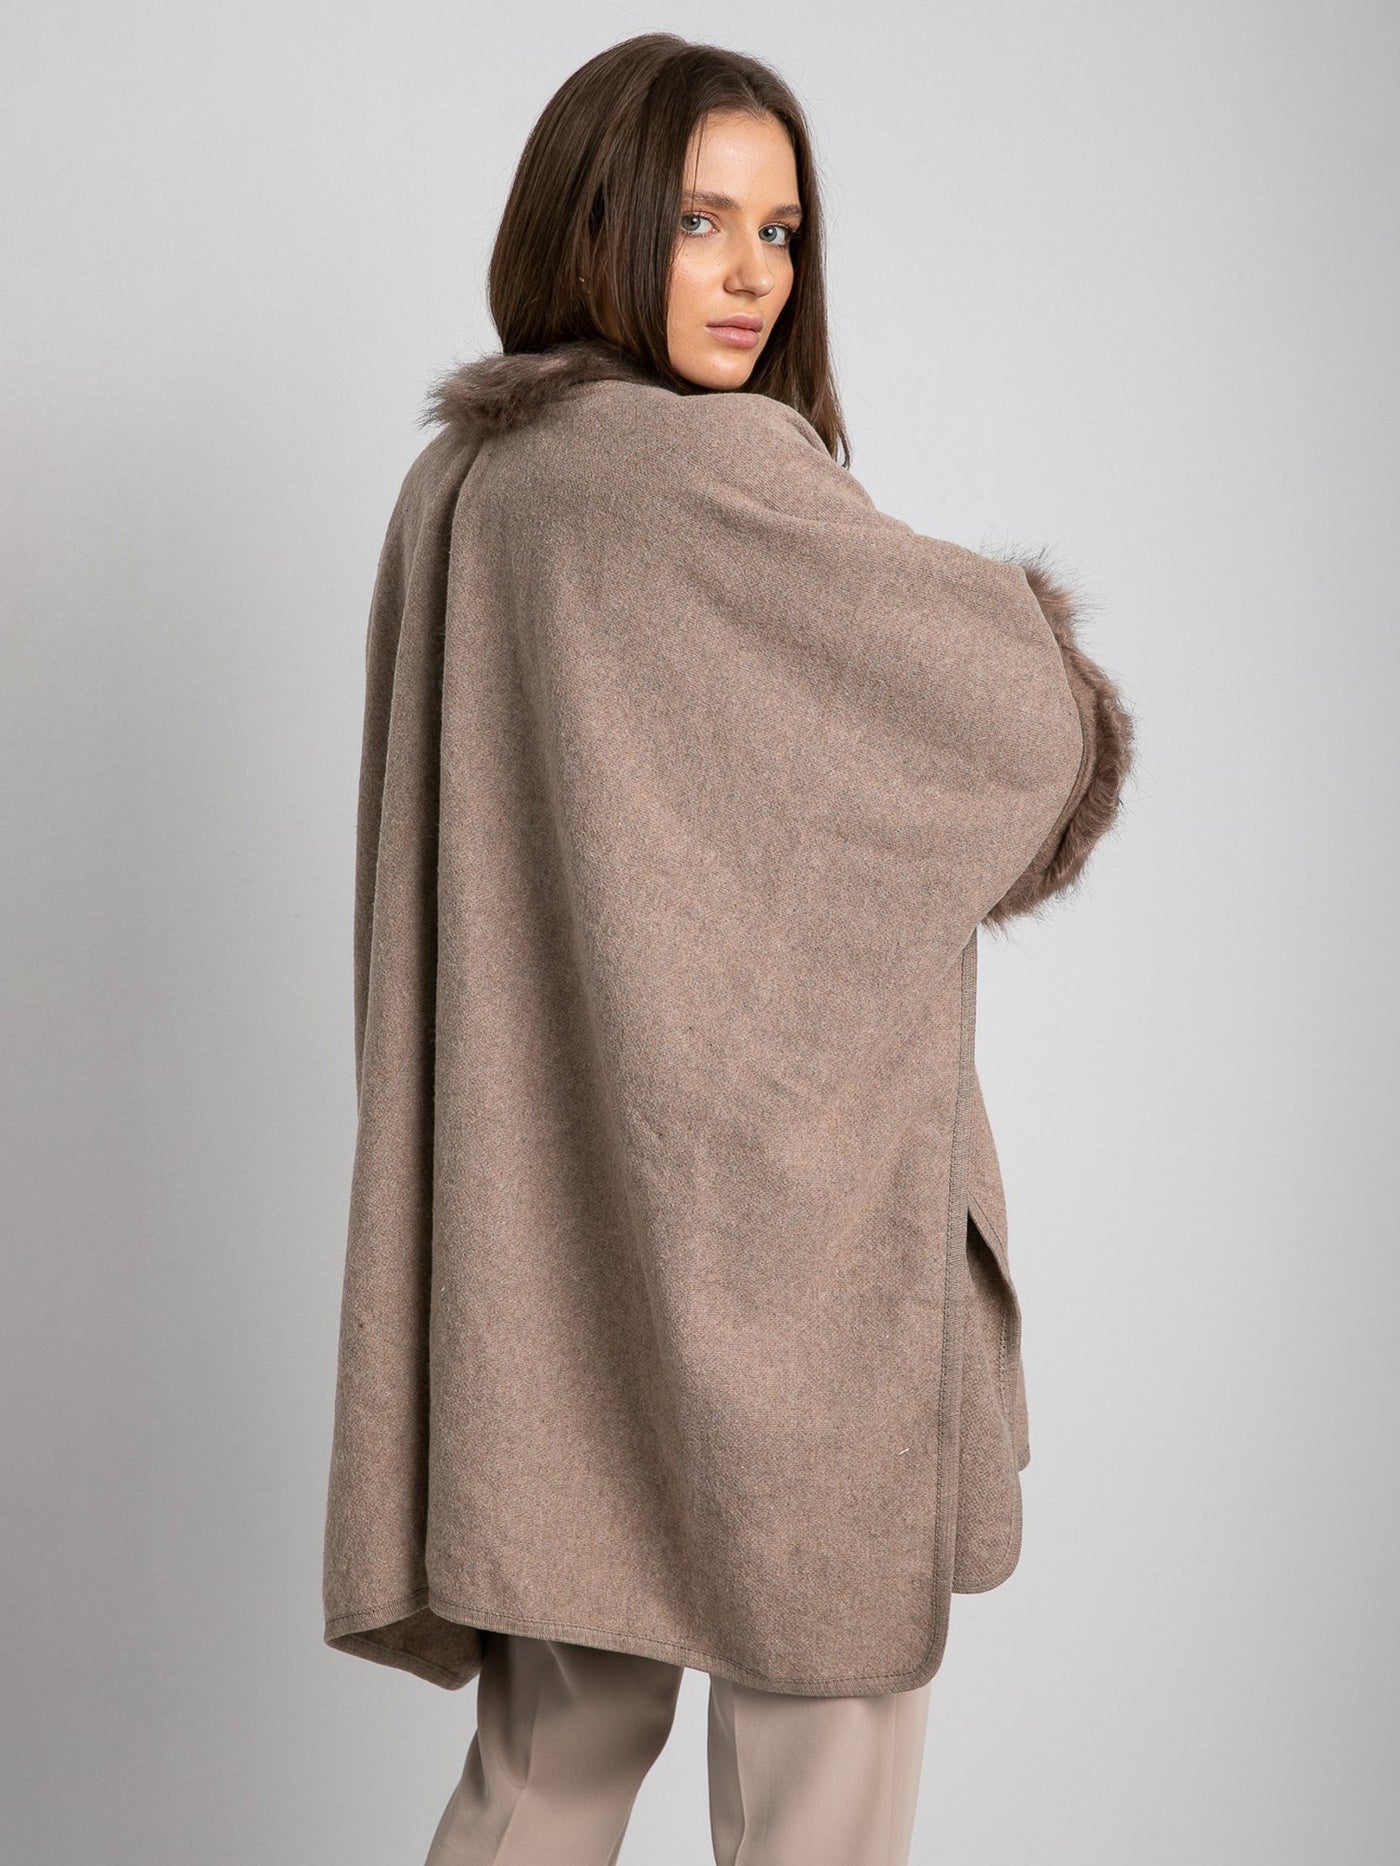 Poncho with Fur Details